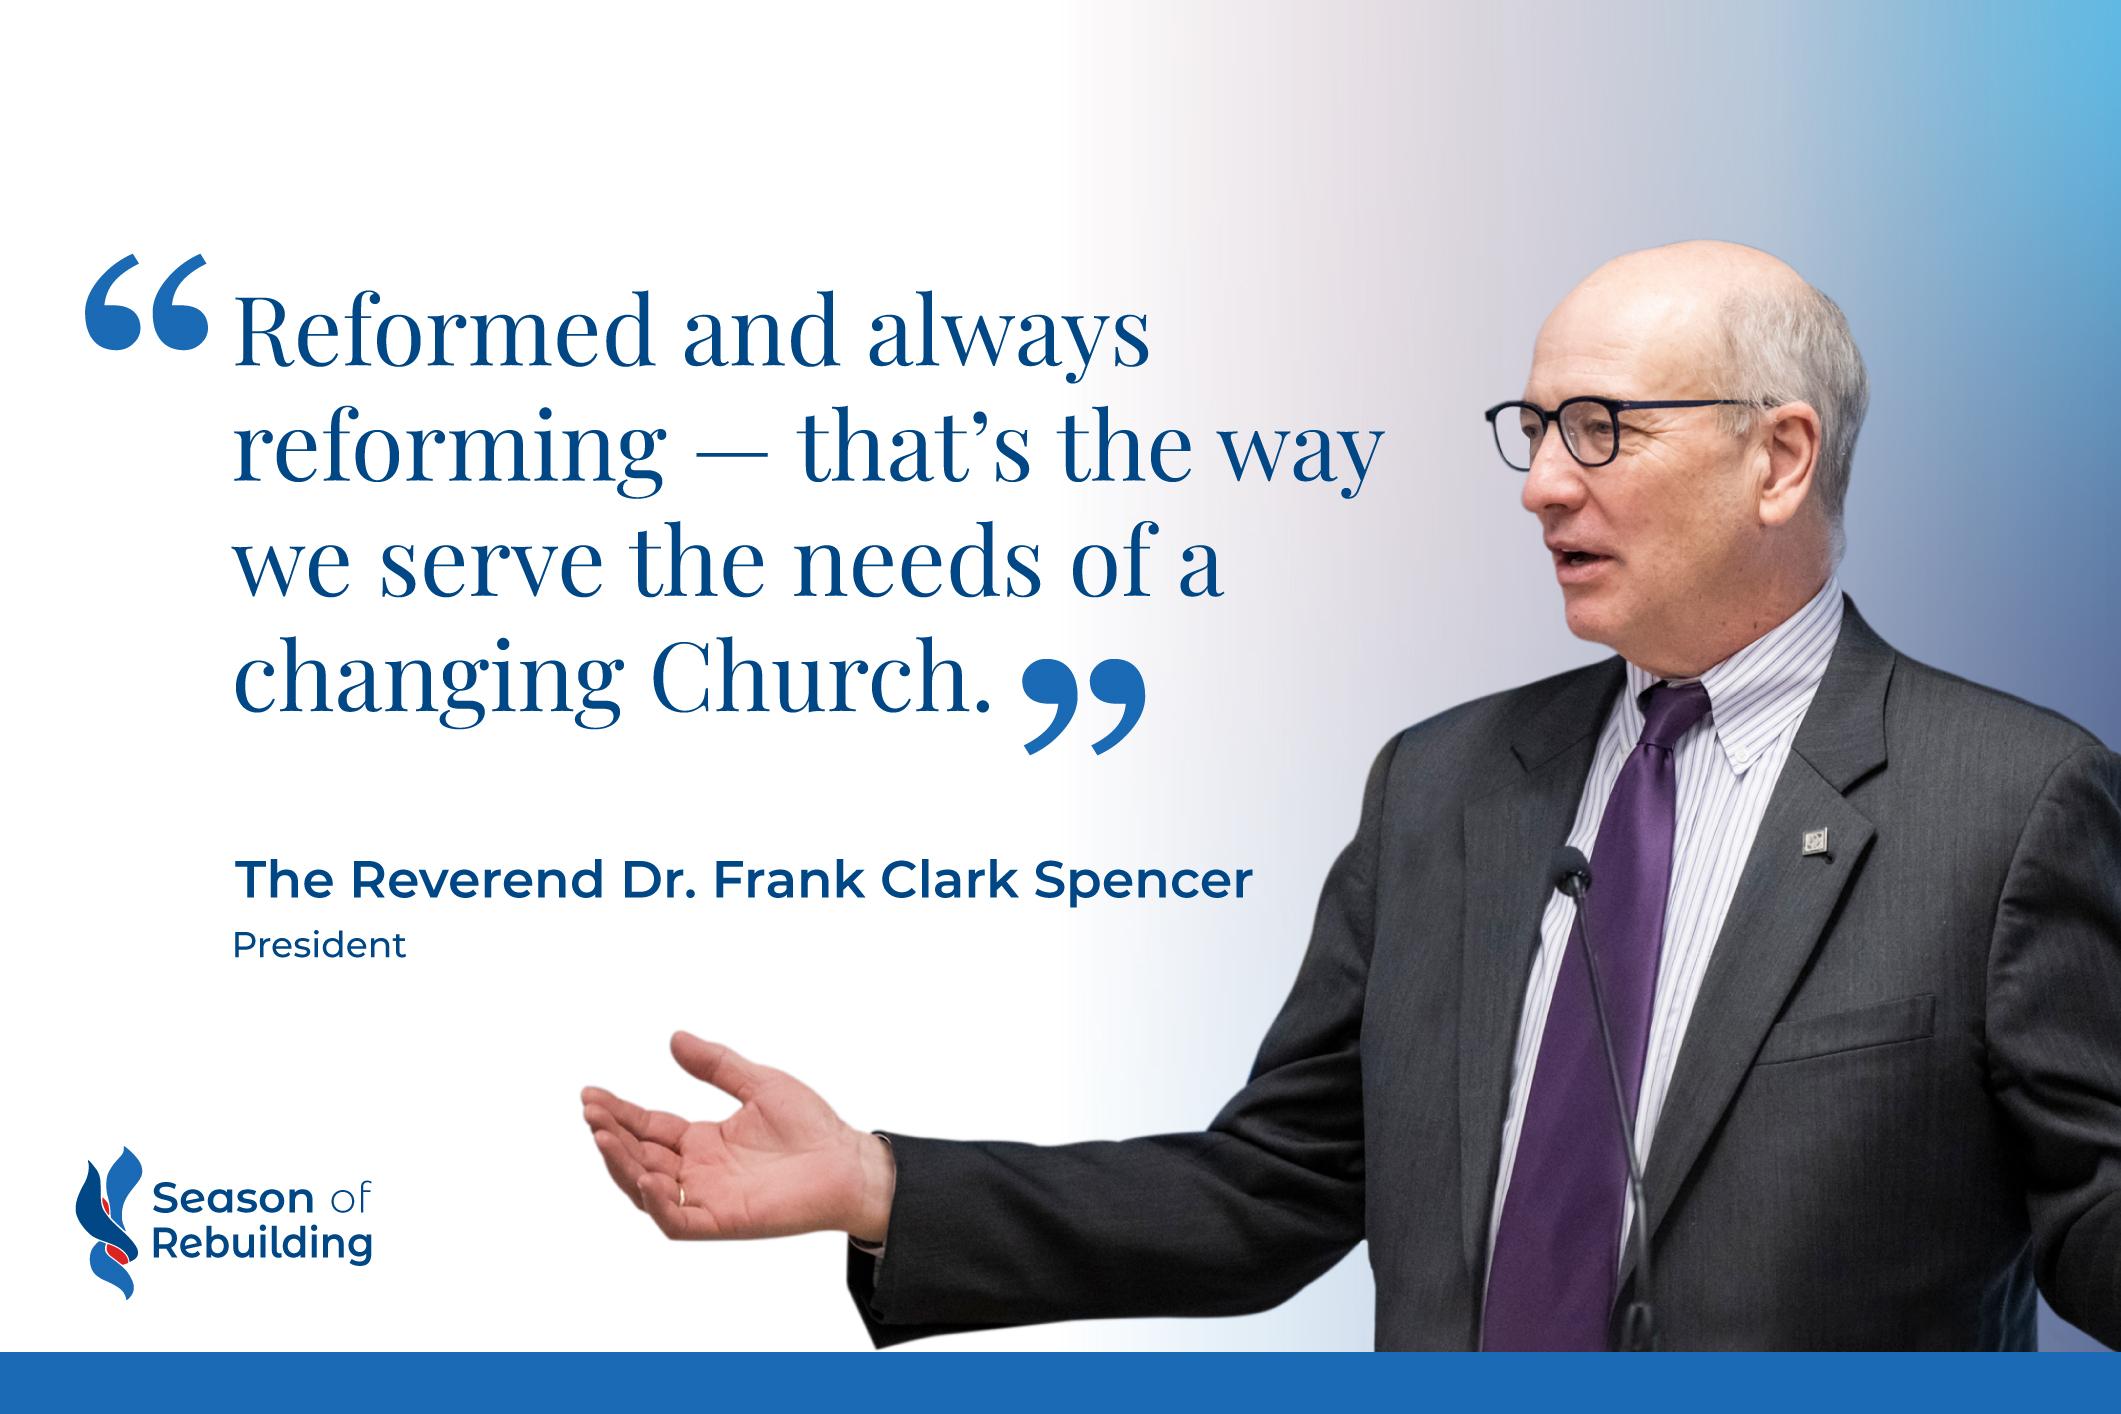 "Reformed and always reforming - that's the way we serve the needs of a changing Church." - The Reverend Dr. Frank Clark Spencer